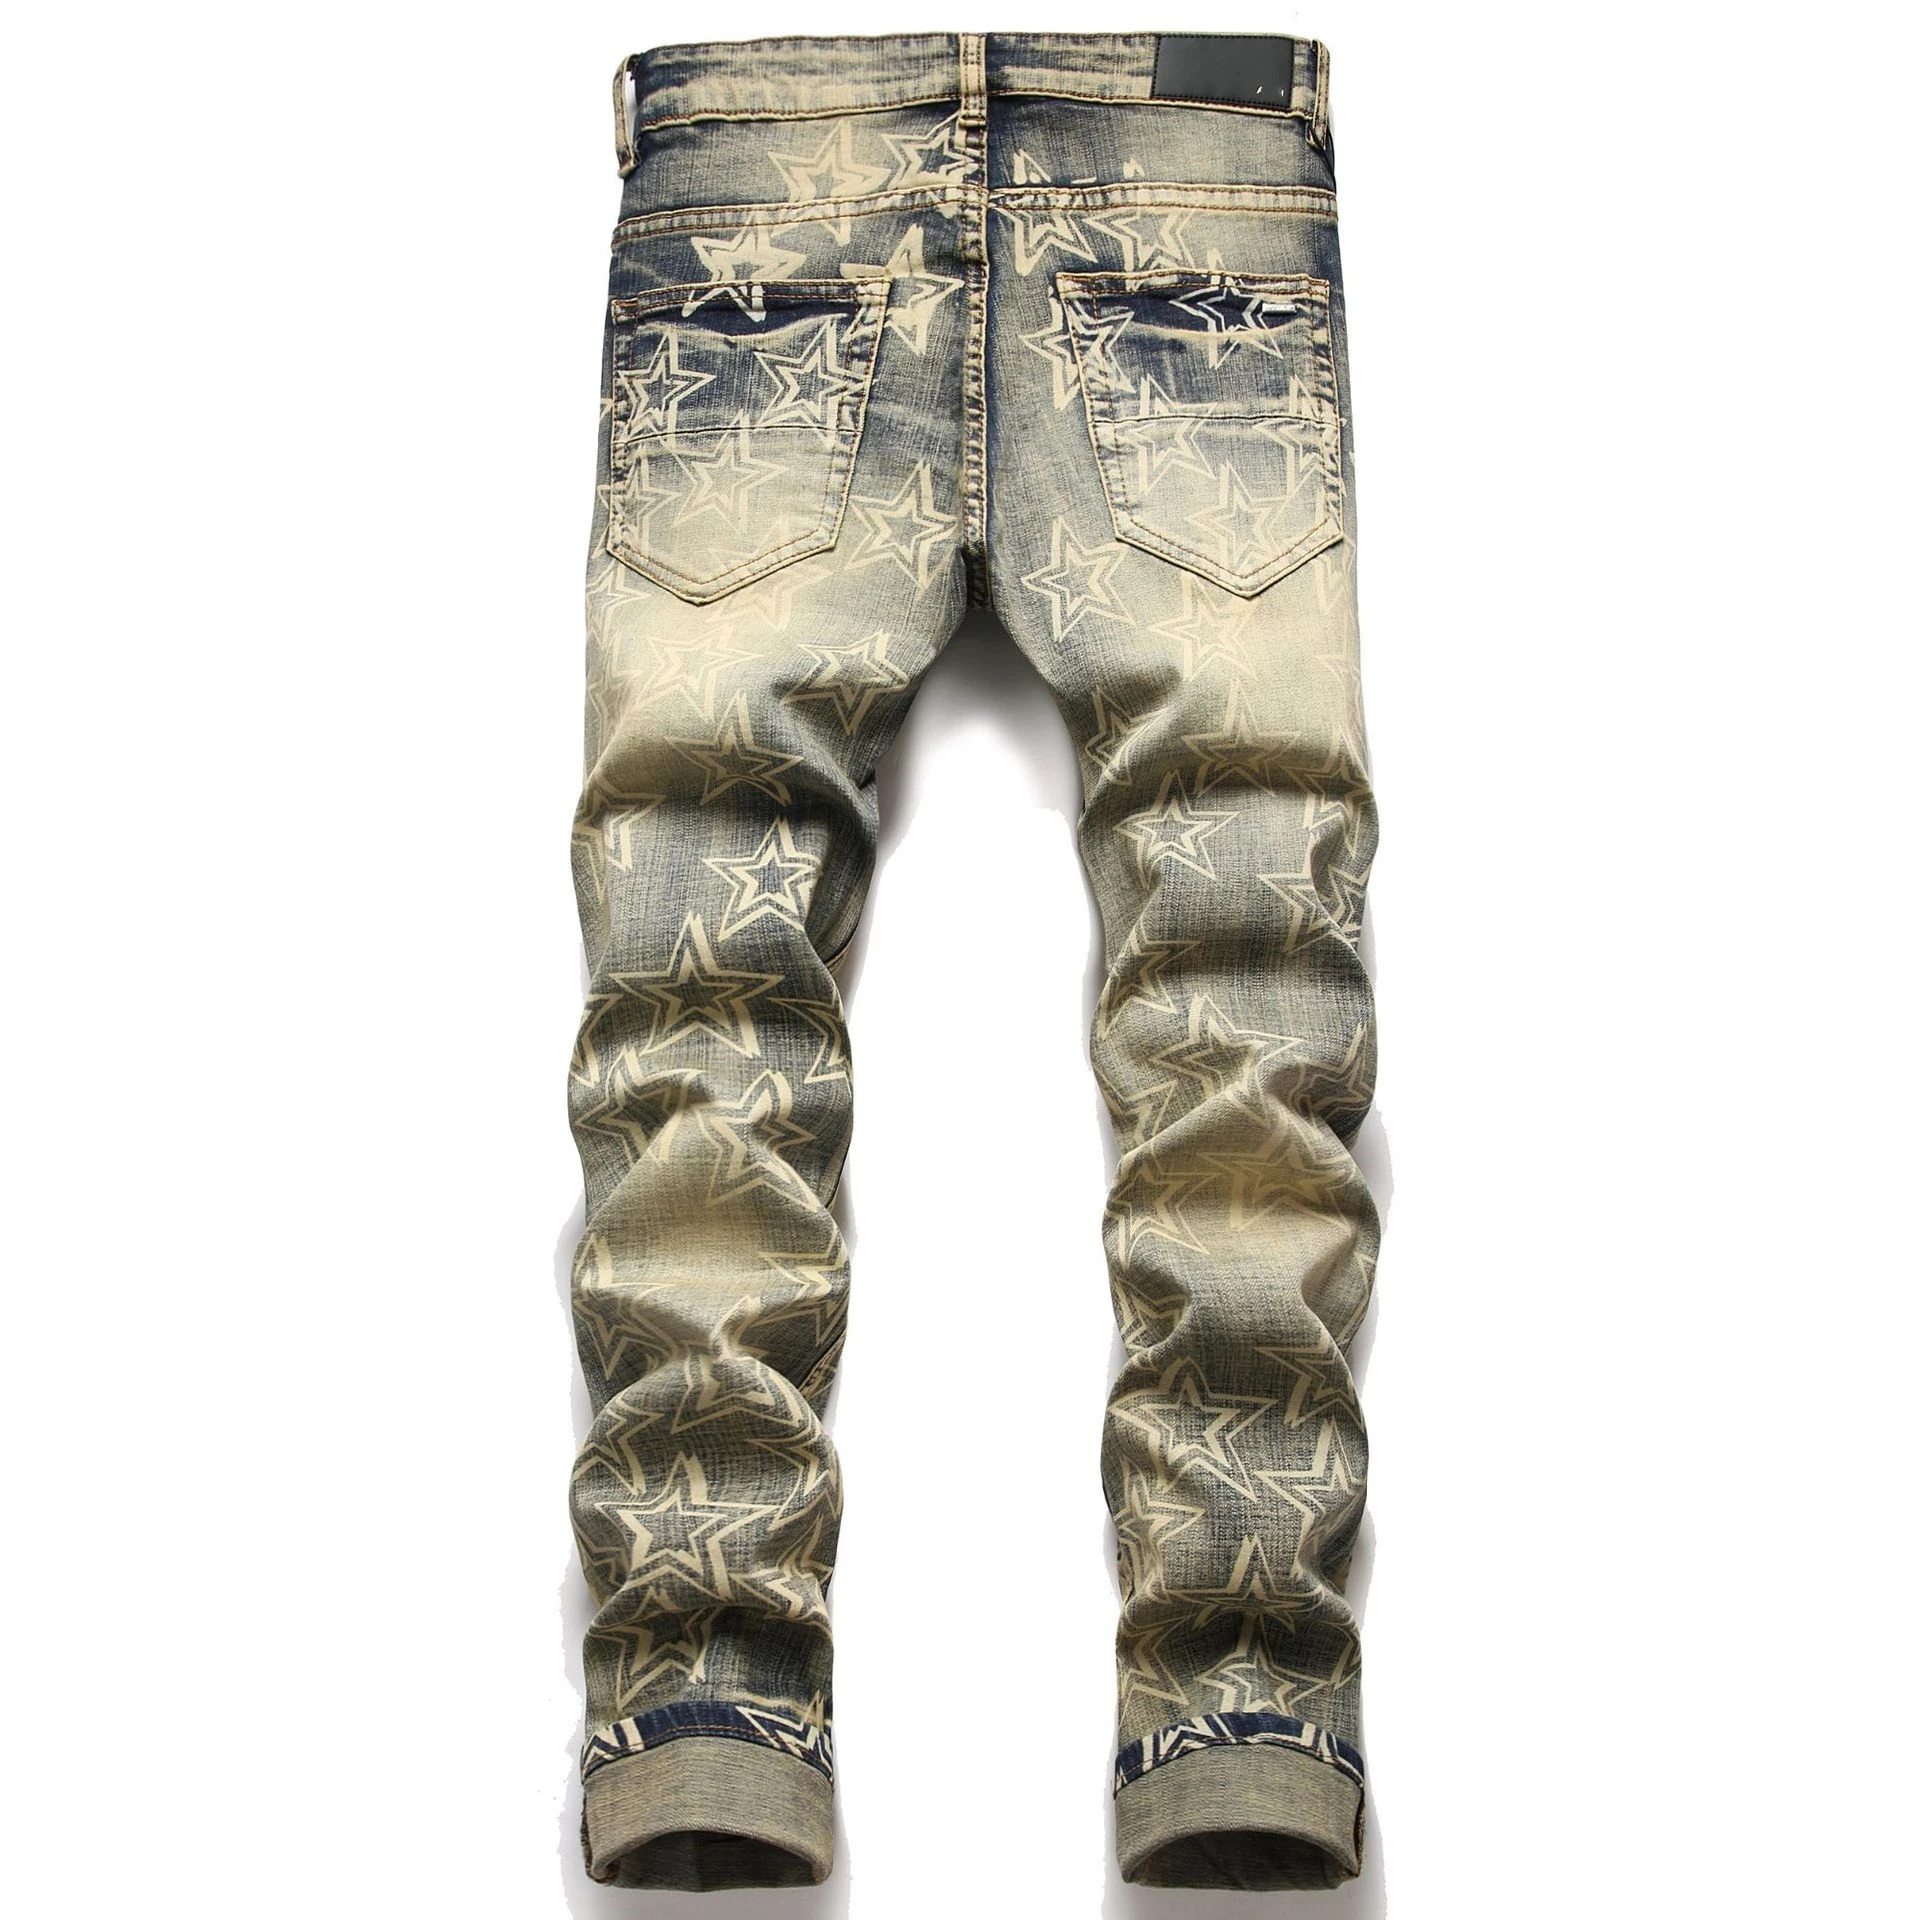 Oem Custom High Street Embroidery Ripped Denim Jeans Vintage Stacked ...